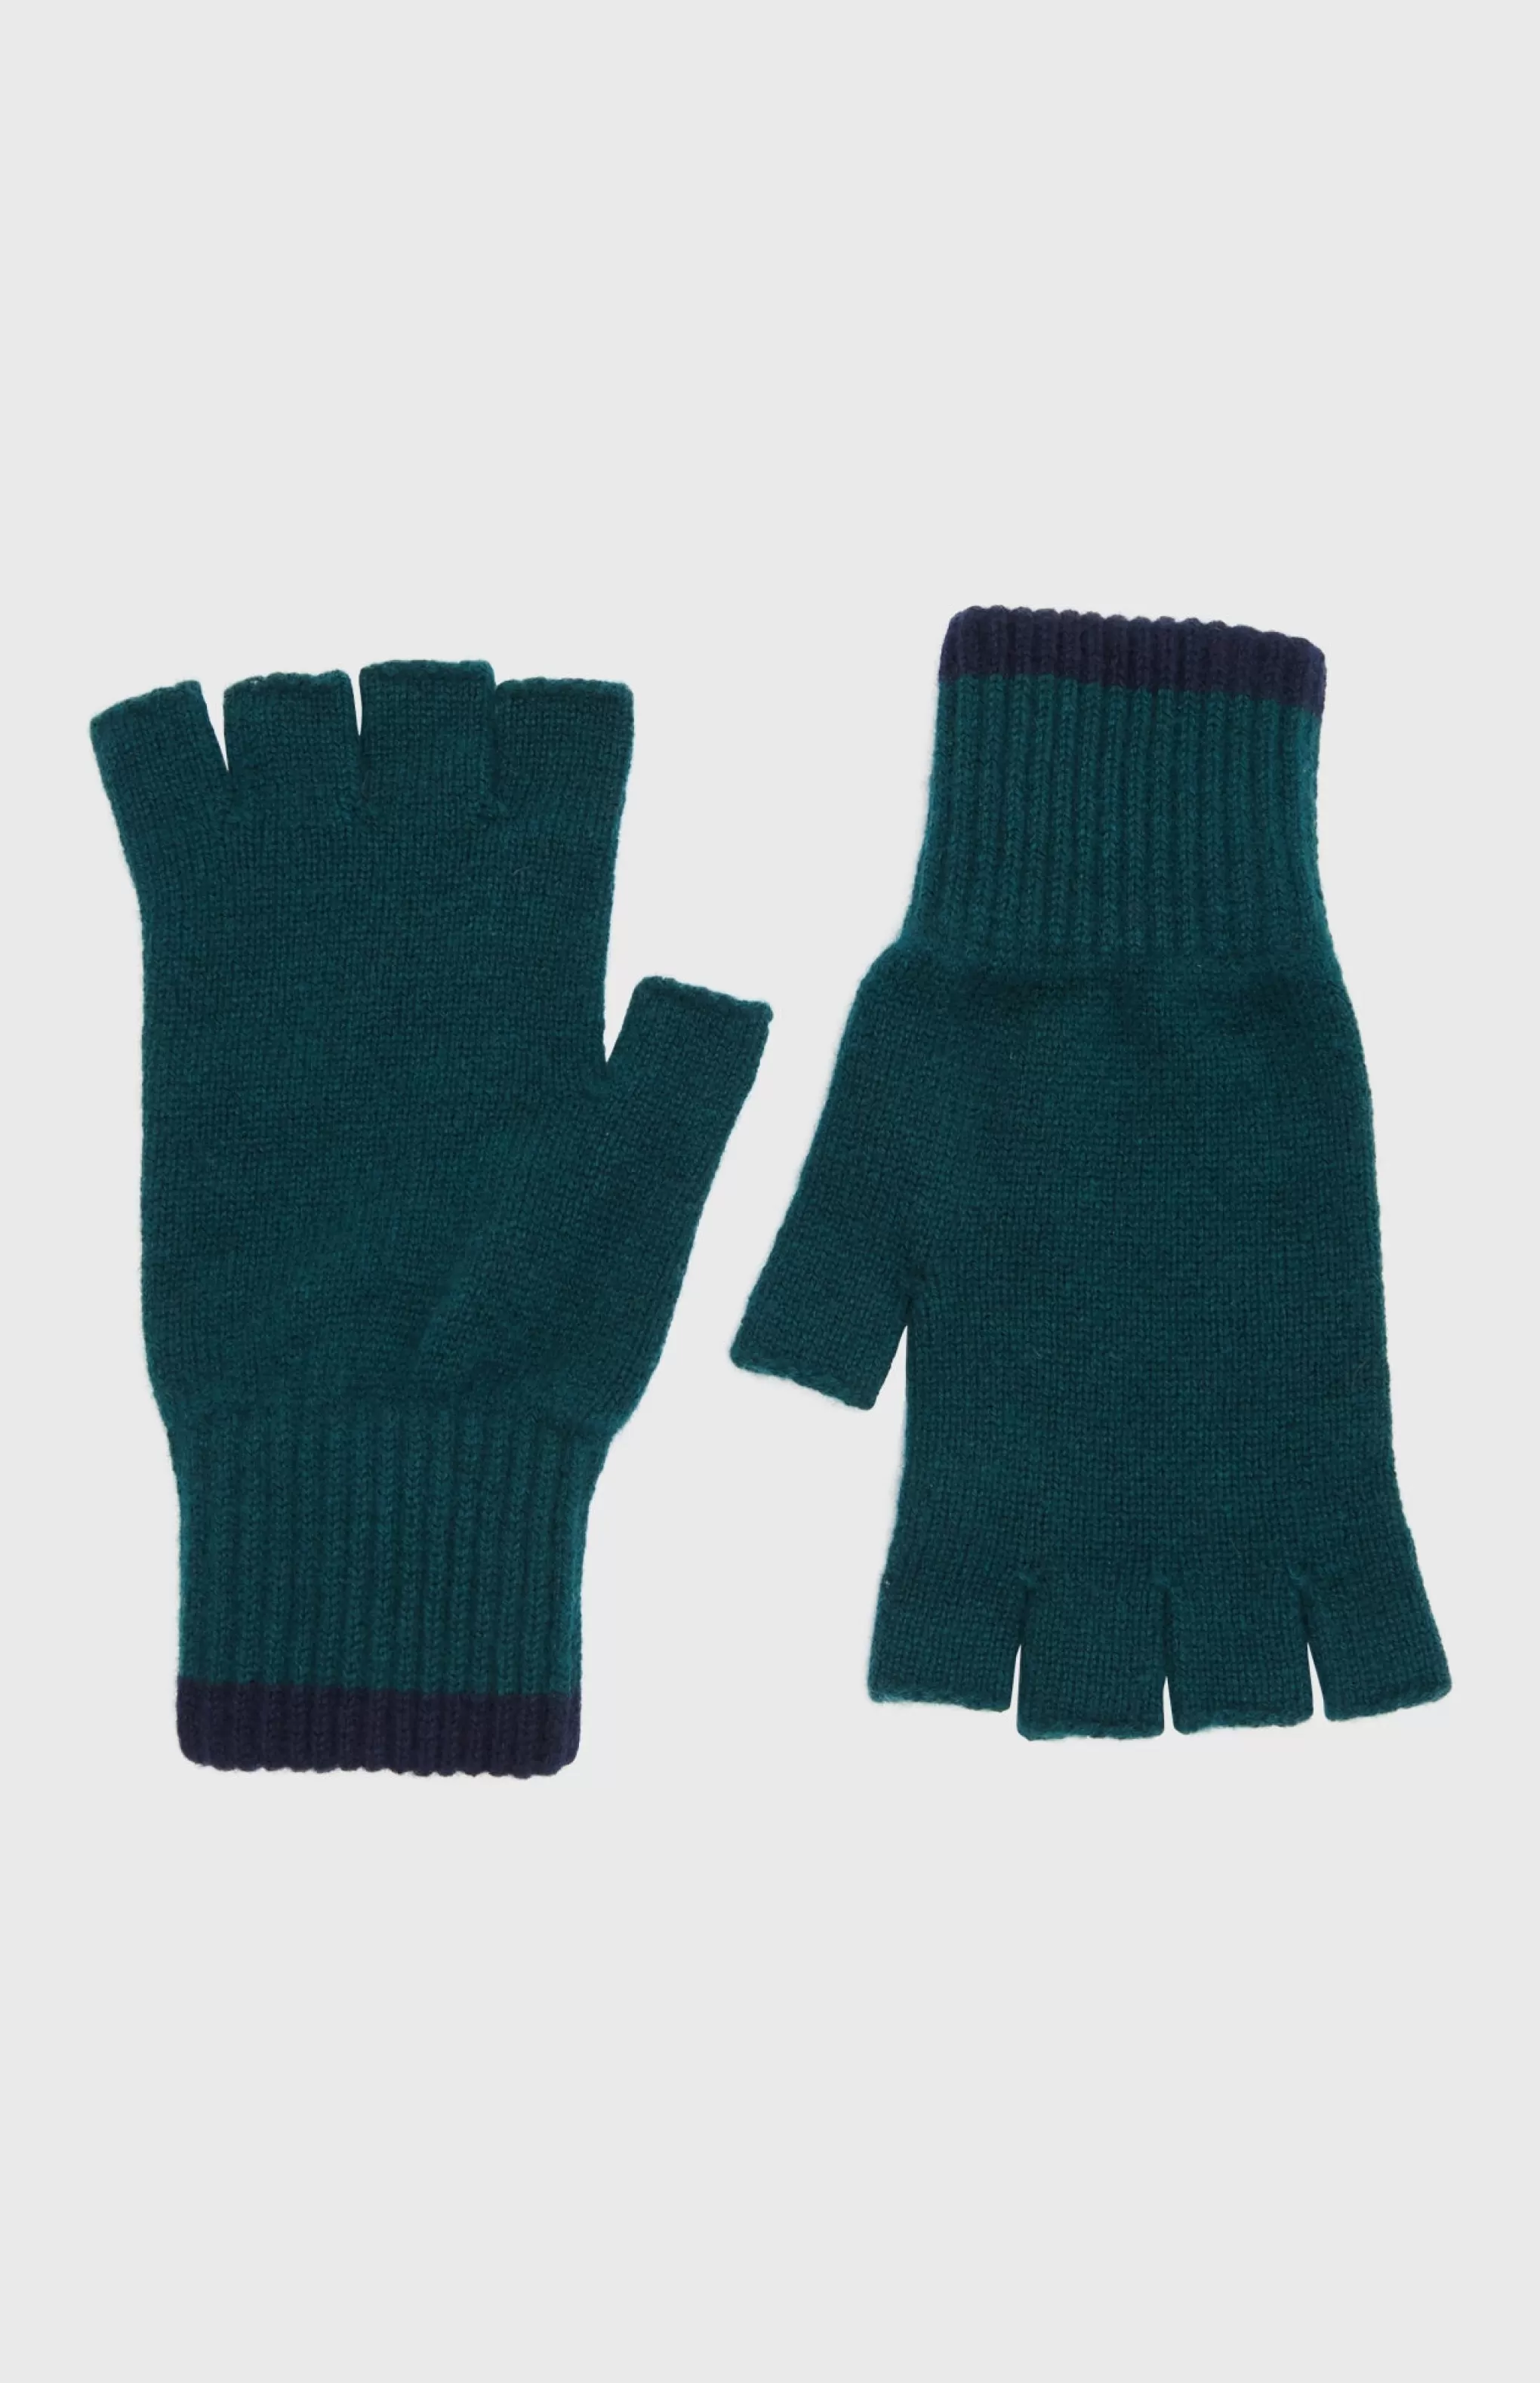 Clearance Cashmere Fingerless Gloves Contrast Ribs In Evergreen And Ink Men Gloves